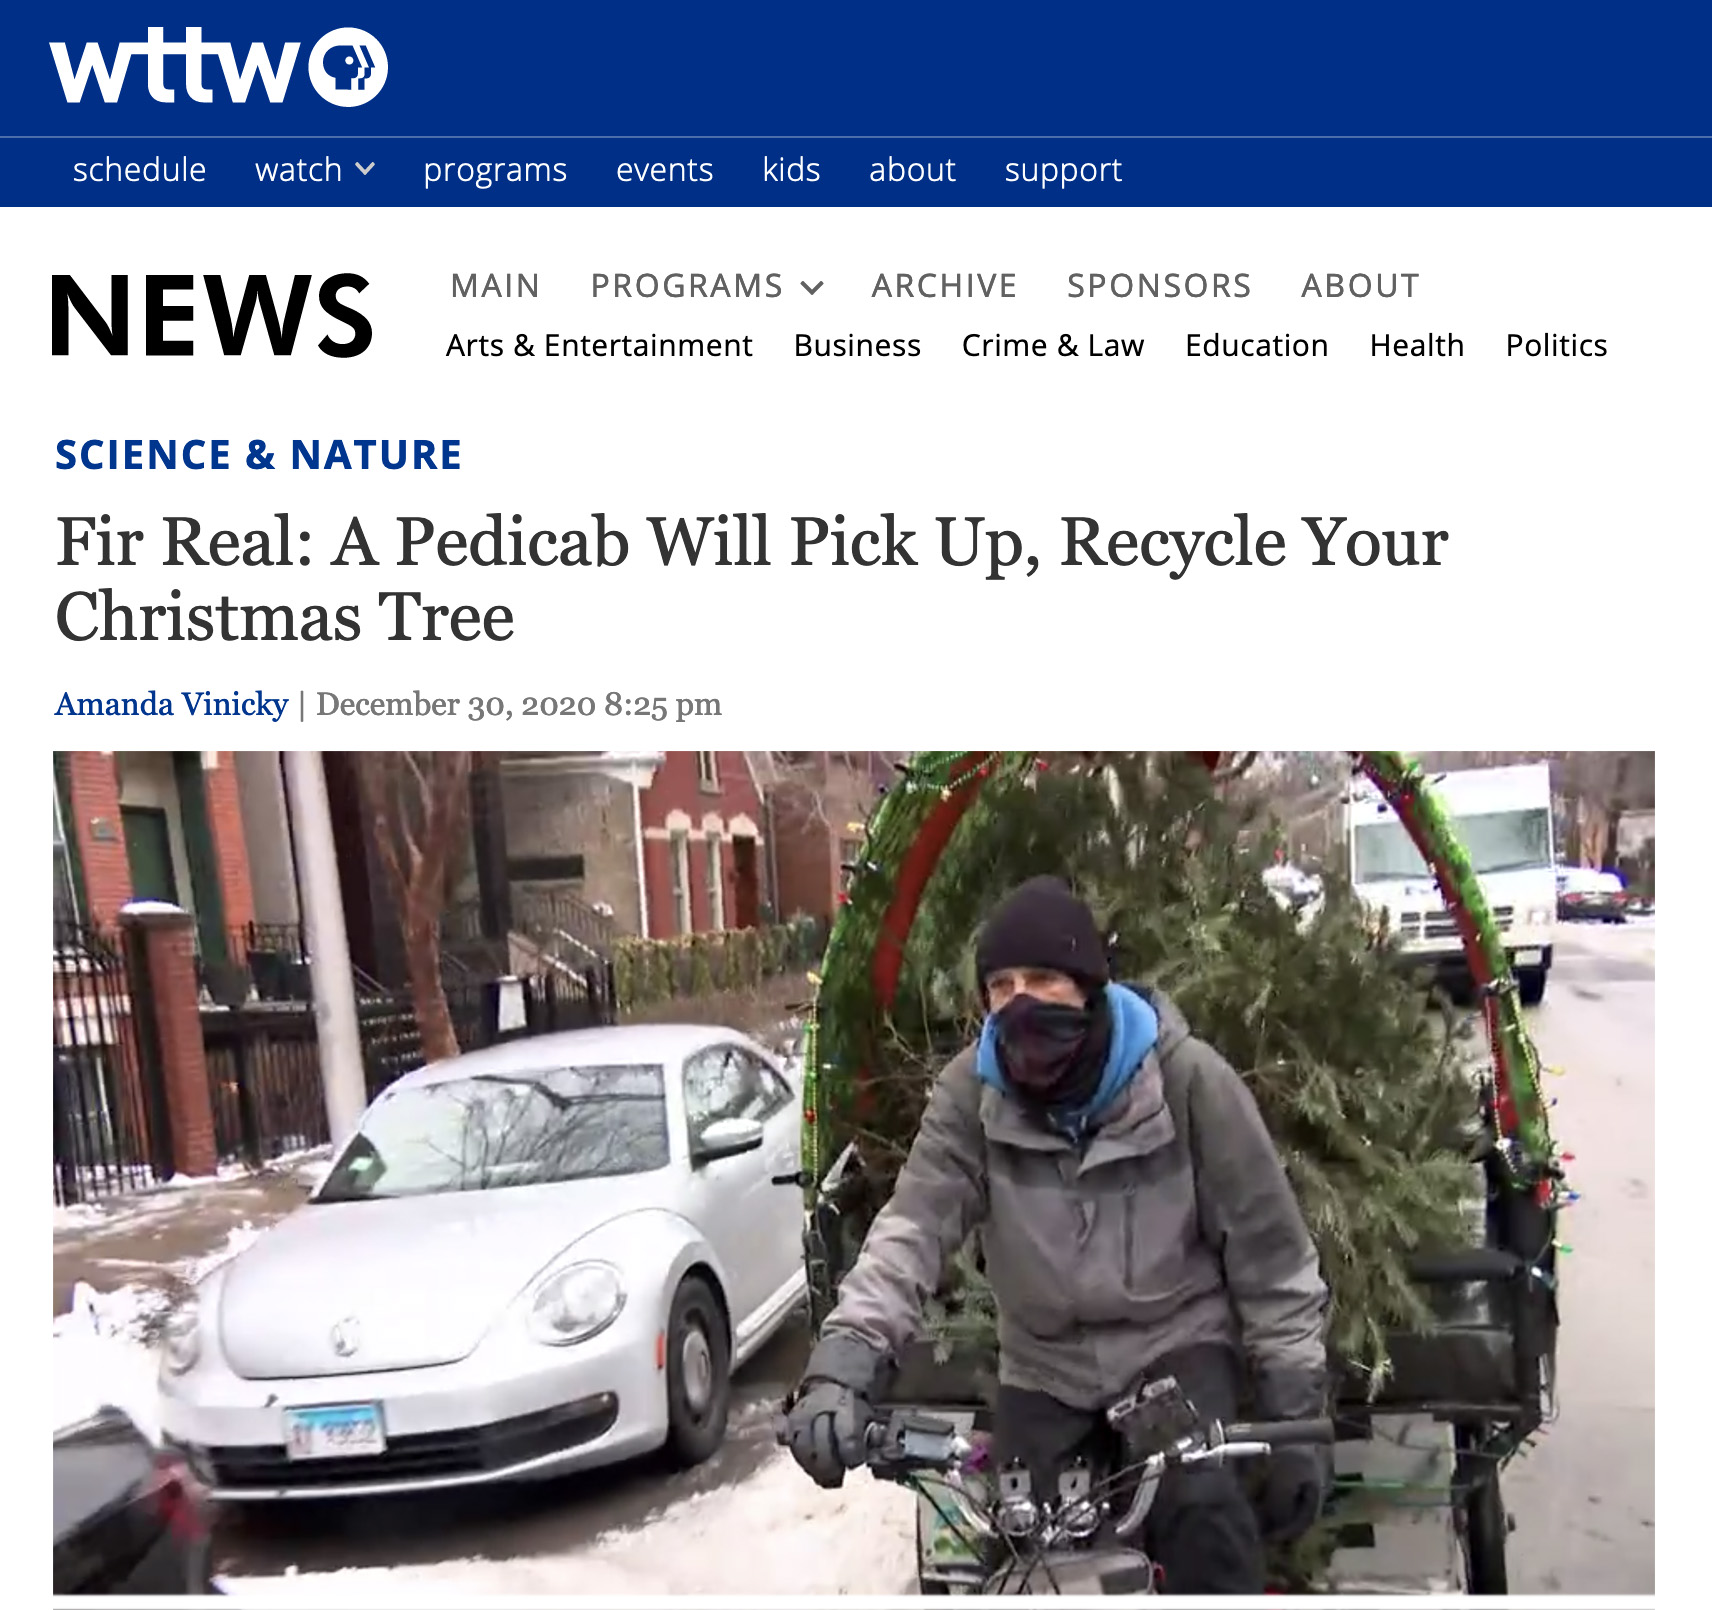 Fir Real: A Pedicab Will Pick Up, Recycle Your Christmas Tree